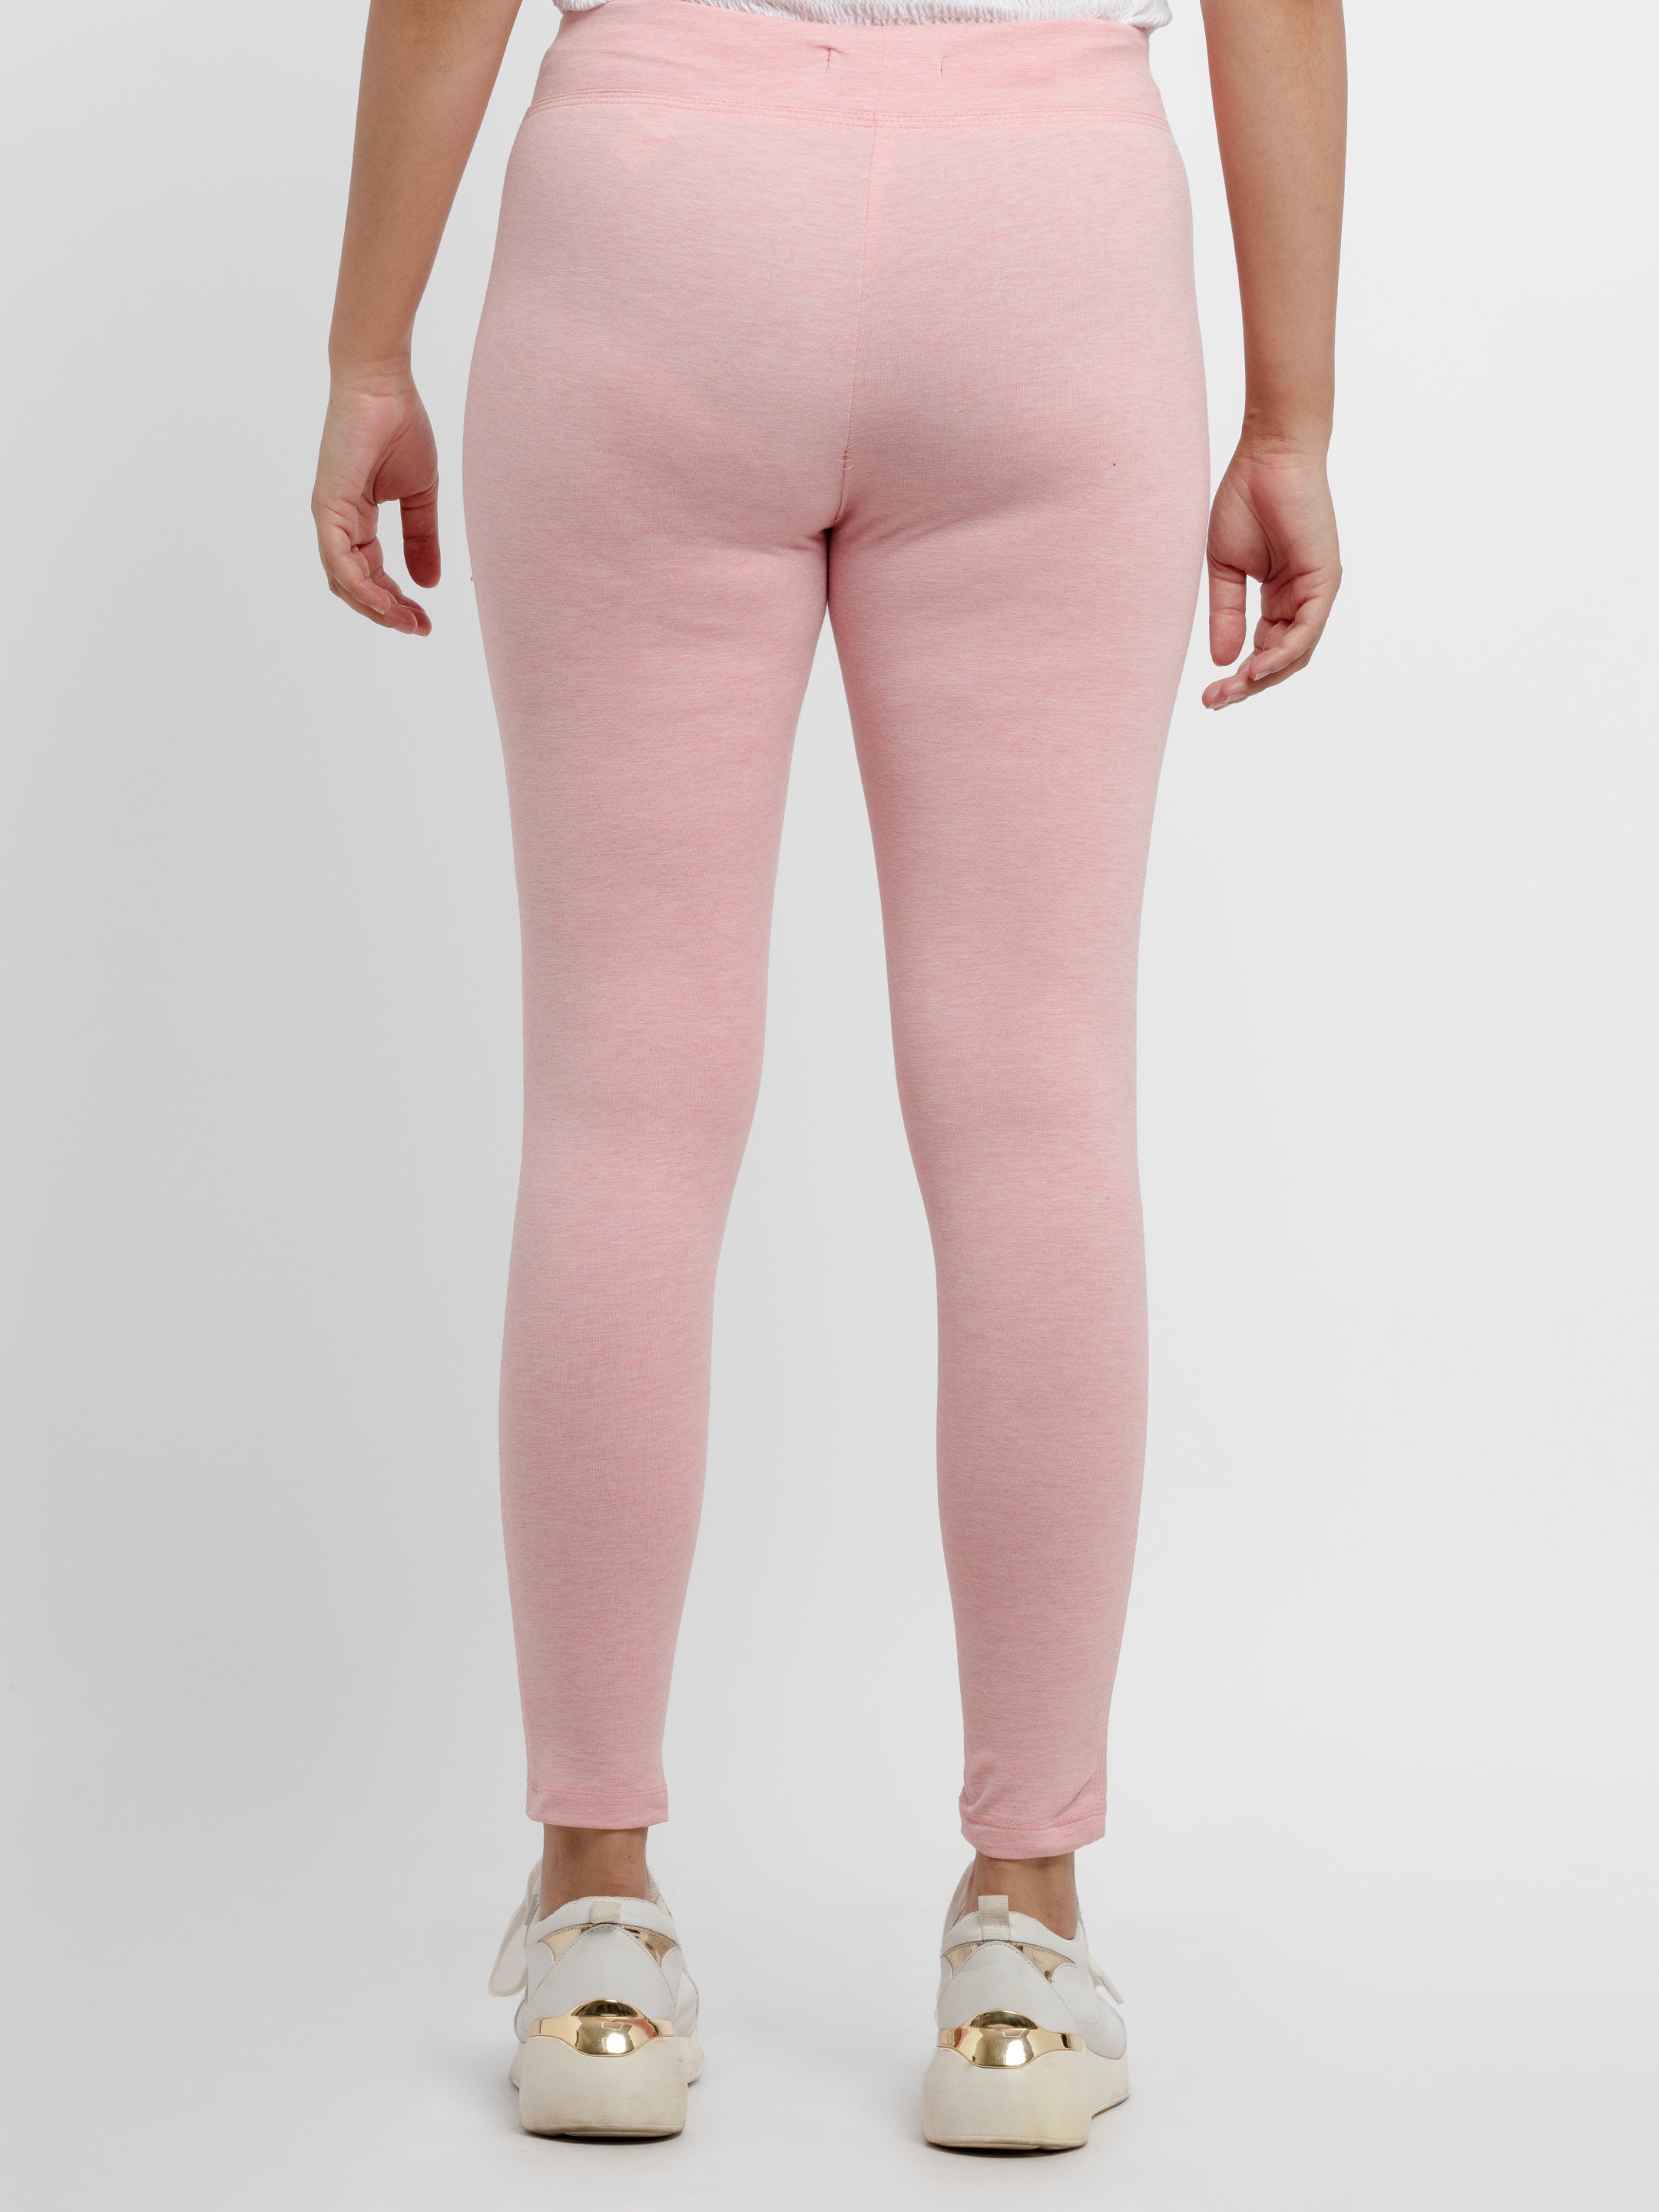 Girls Solid Baby Pink Jeggings